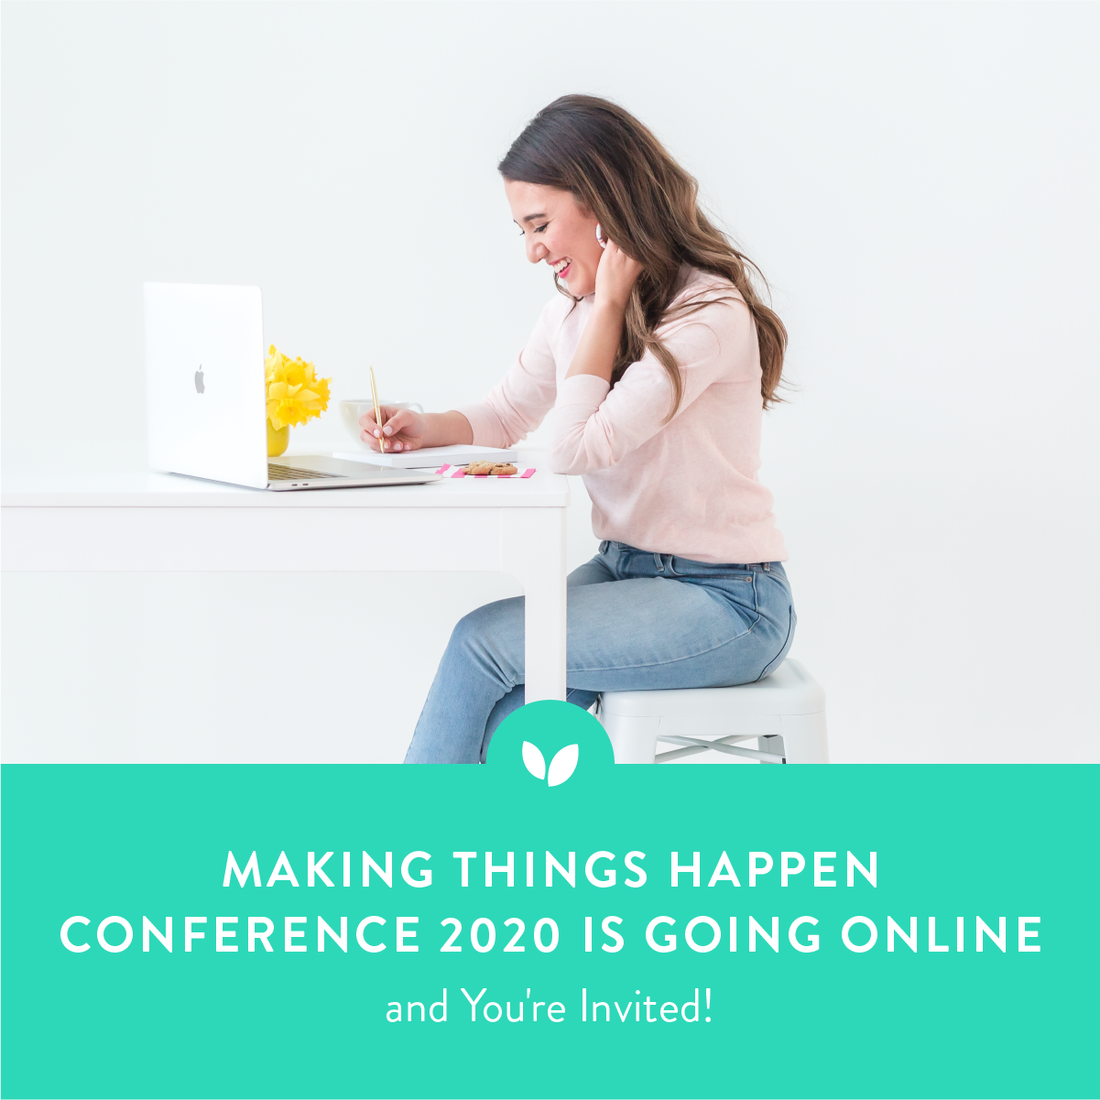 Making Things Happen Conference 2020 is Going Online, and You're Invited!